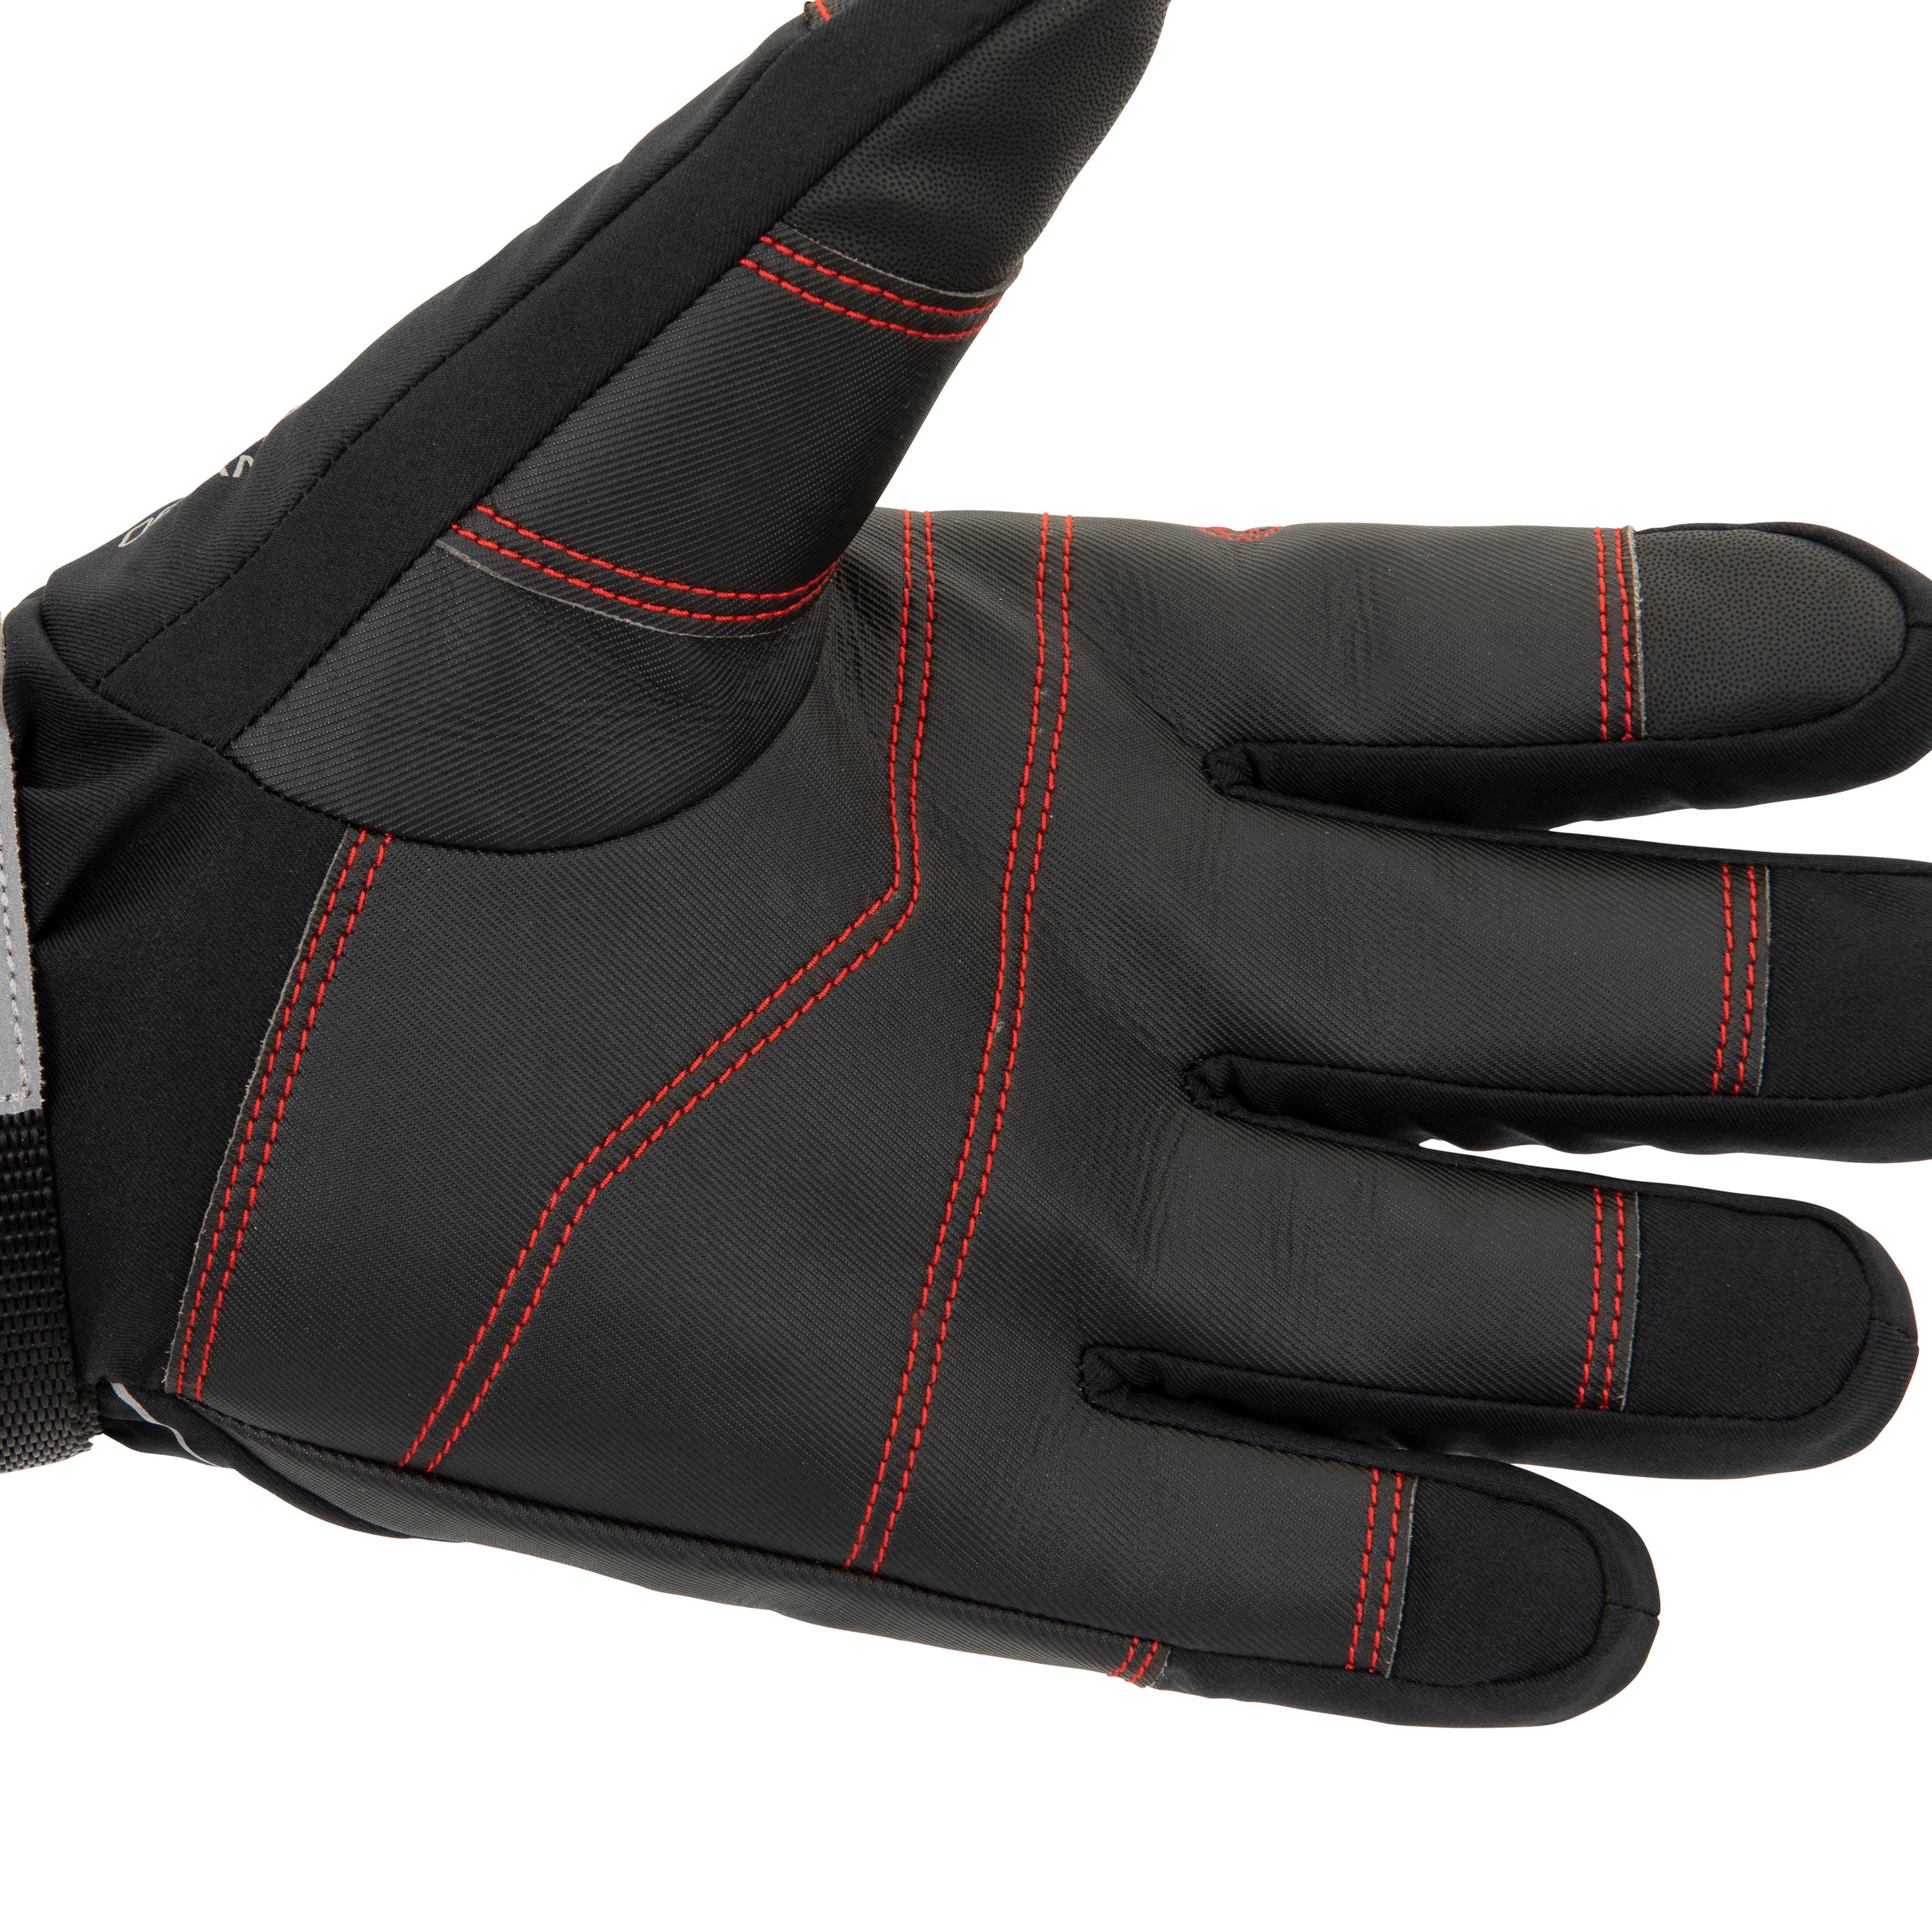 Adult sailing waterproof gloves OFFSHORE 900 6/10